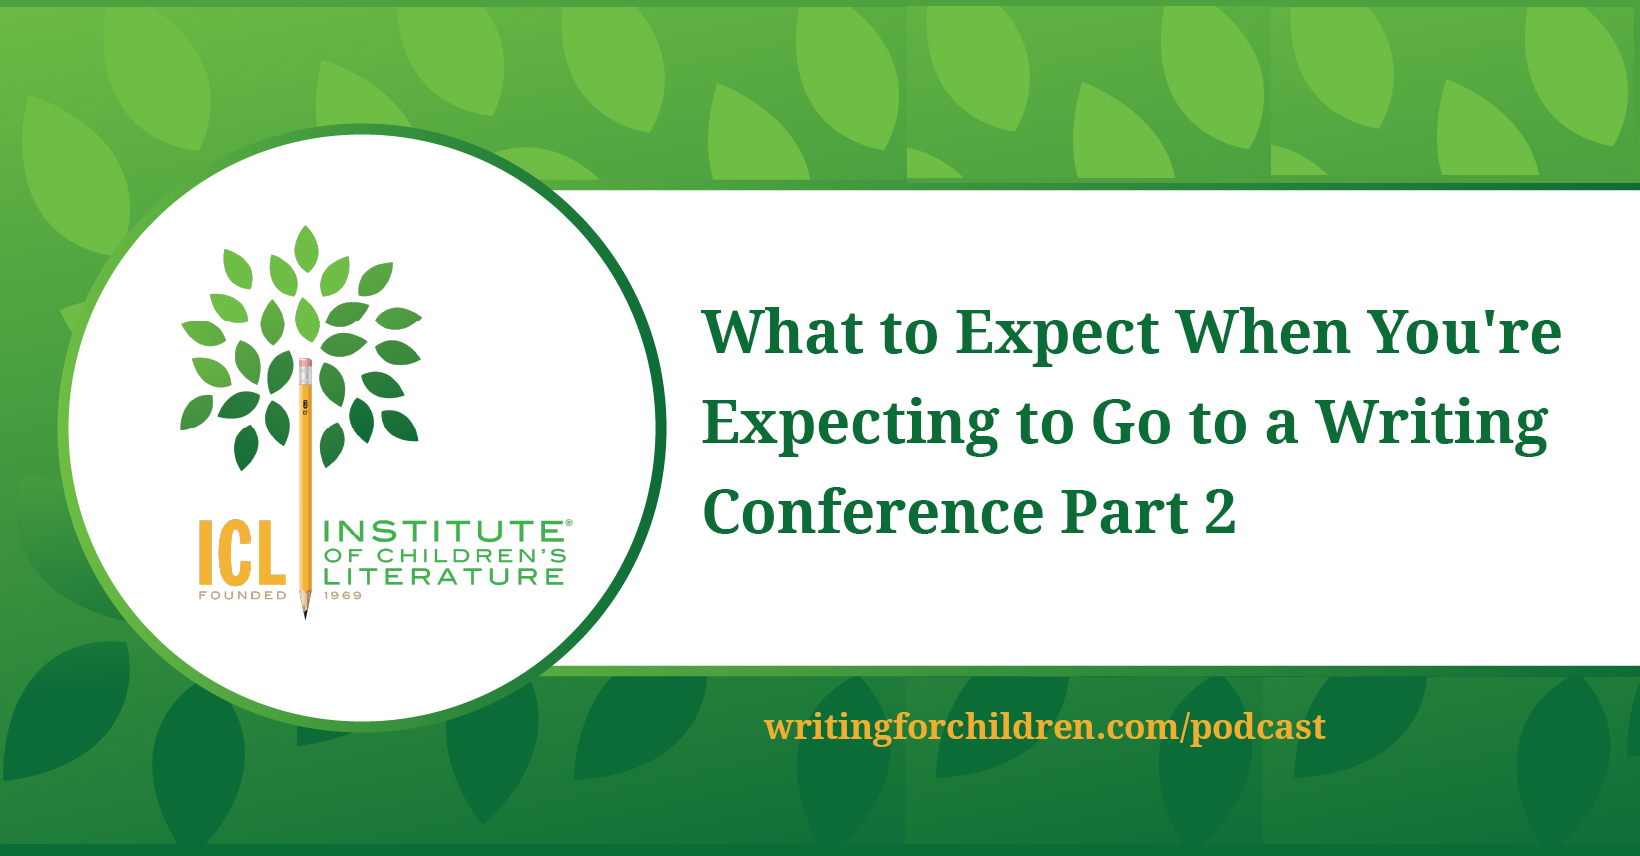 What-to-Expect-When-Youre-Expecting-to-Go-to-a-Writing-Conference-Part-2-episode-45